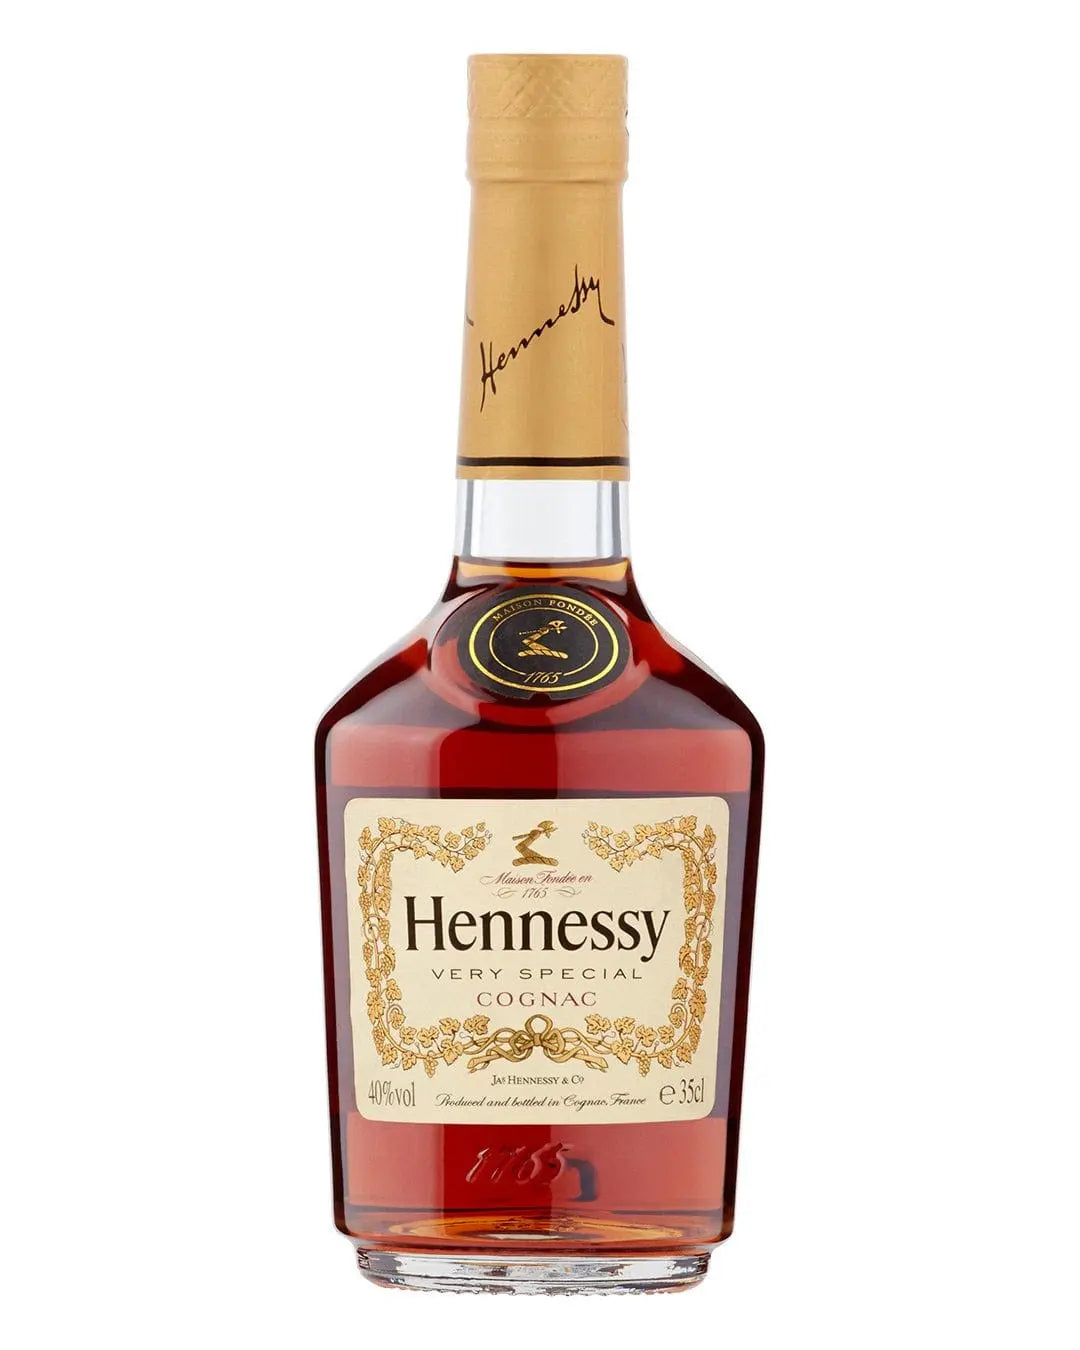 Hennessy Very Special Cognac Small Bottle, 20 cl – The Bottle Club